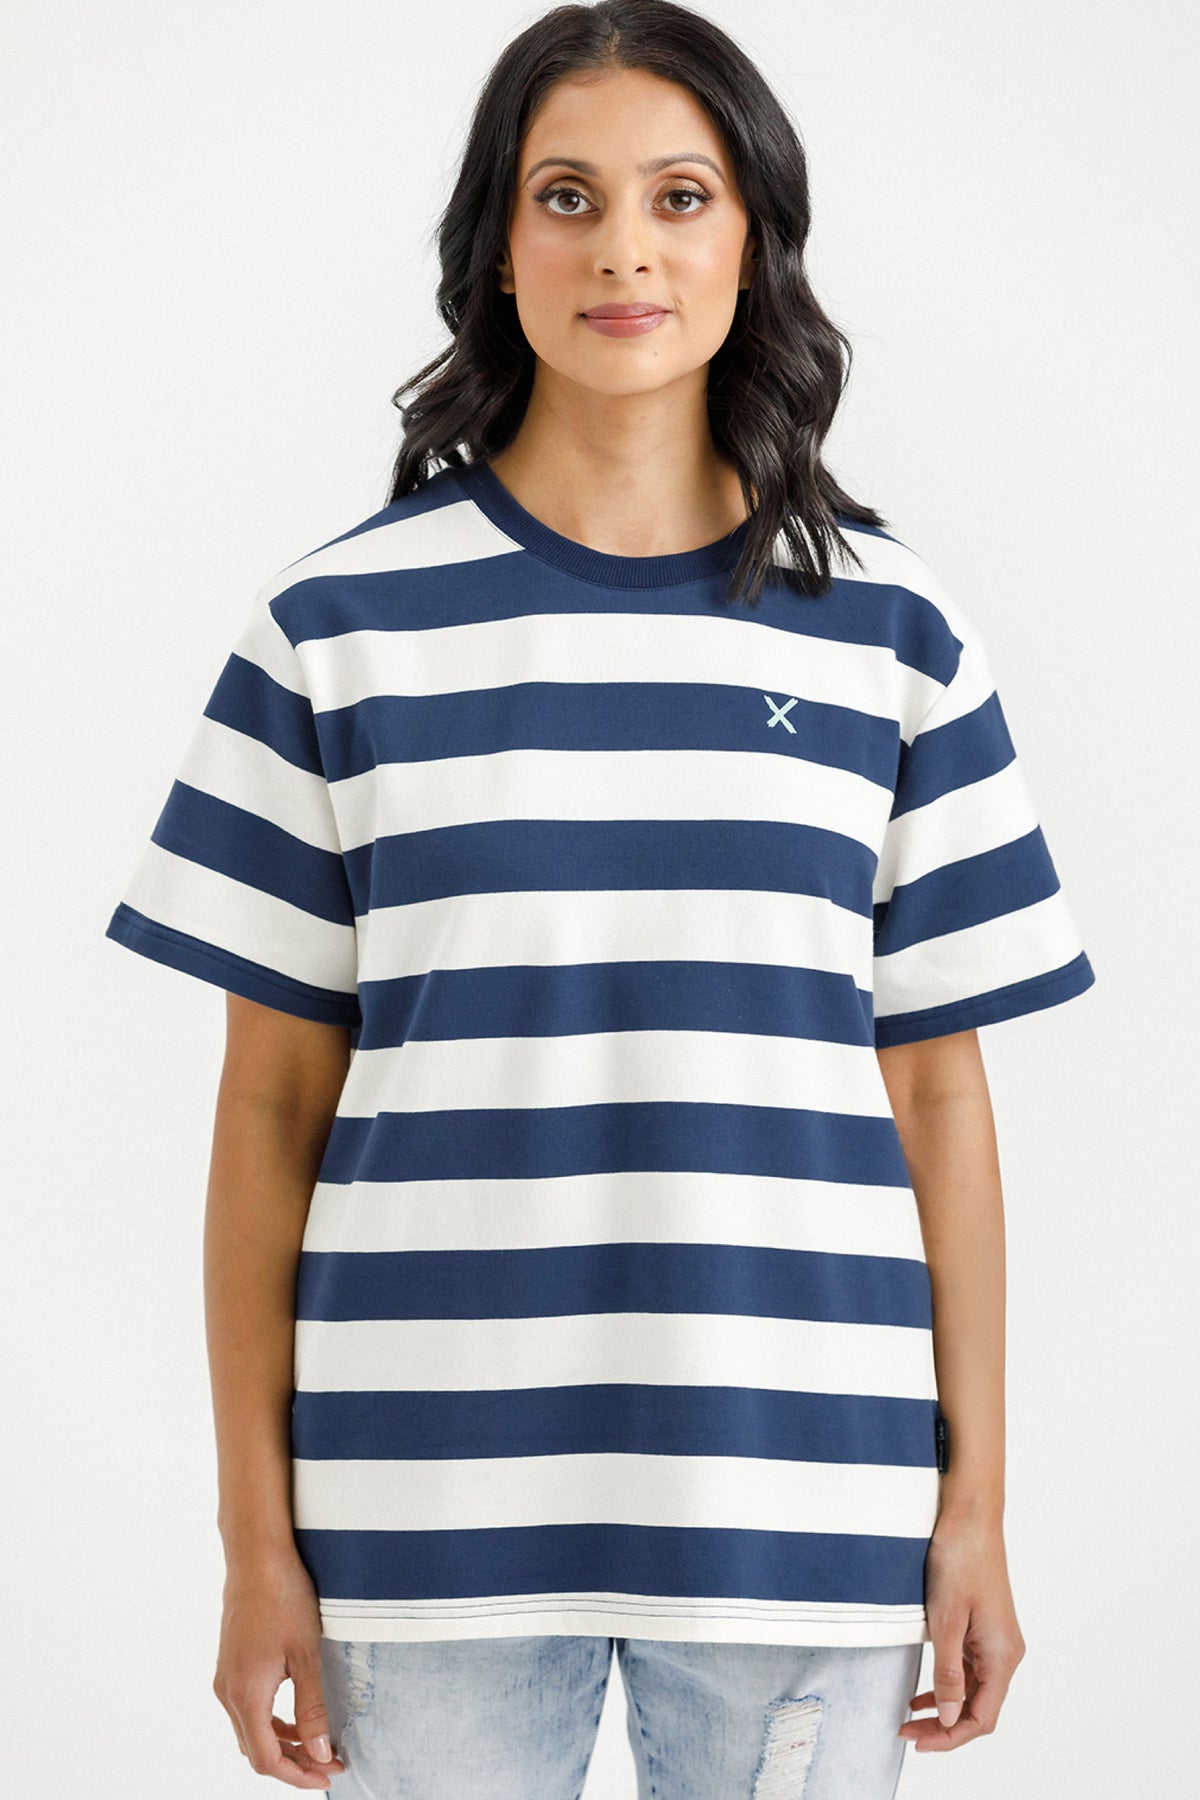 Chris Tee Indigo Blue Stripe With Mini X - PREORDER DELIVERY EARLY JUNE